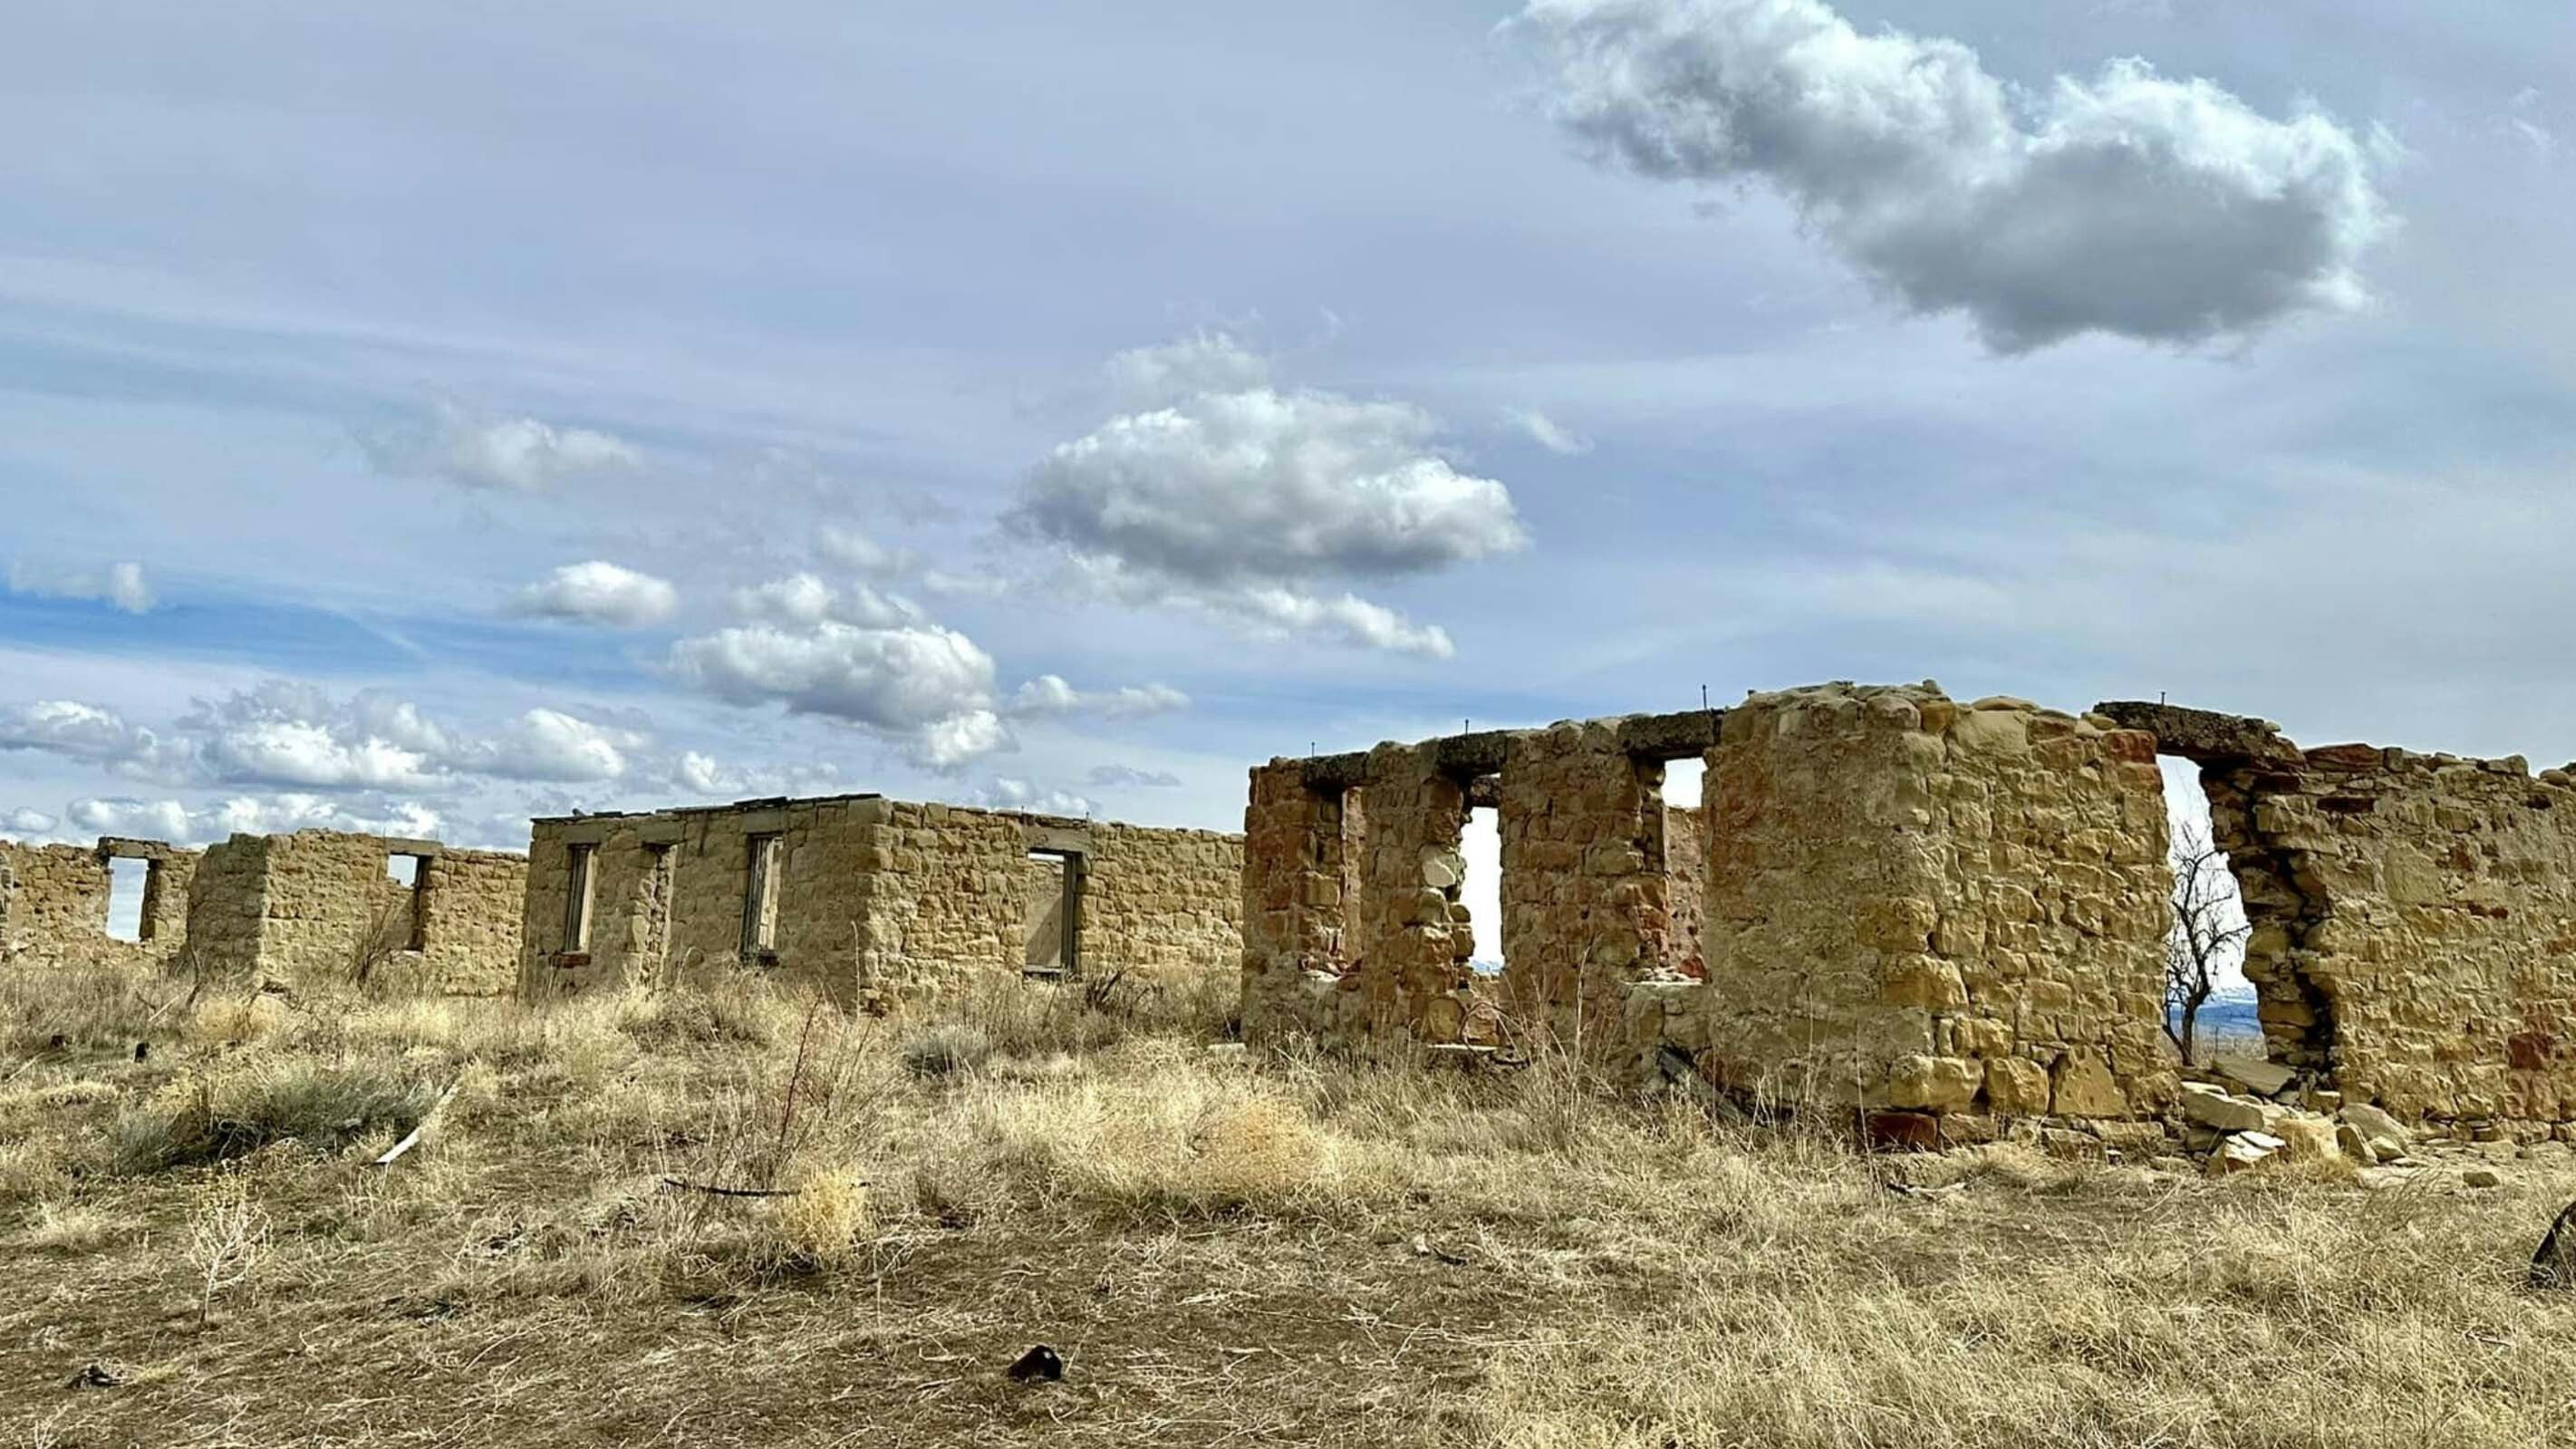 Remants of the town of Gebo, Wyoming